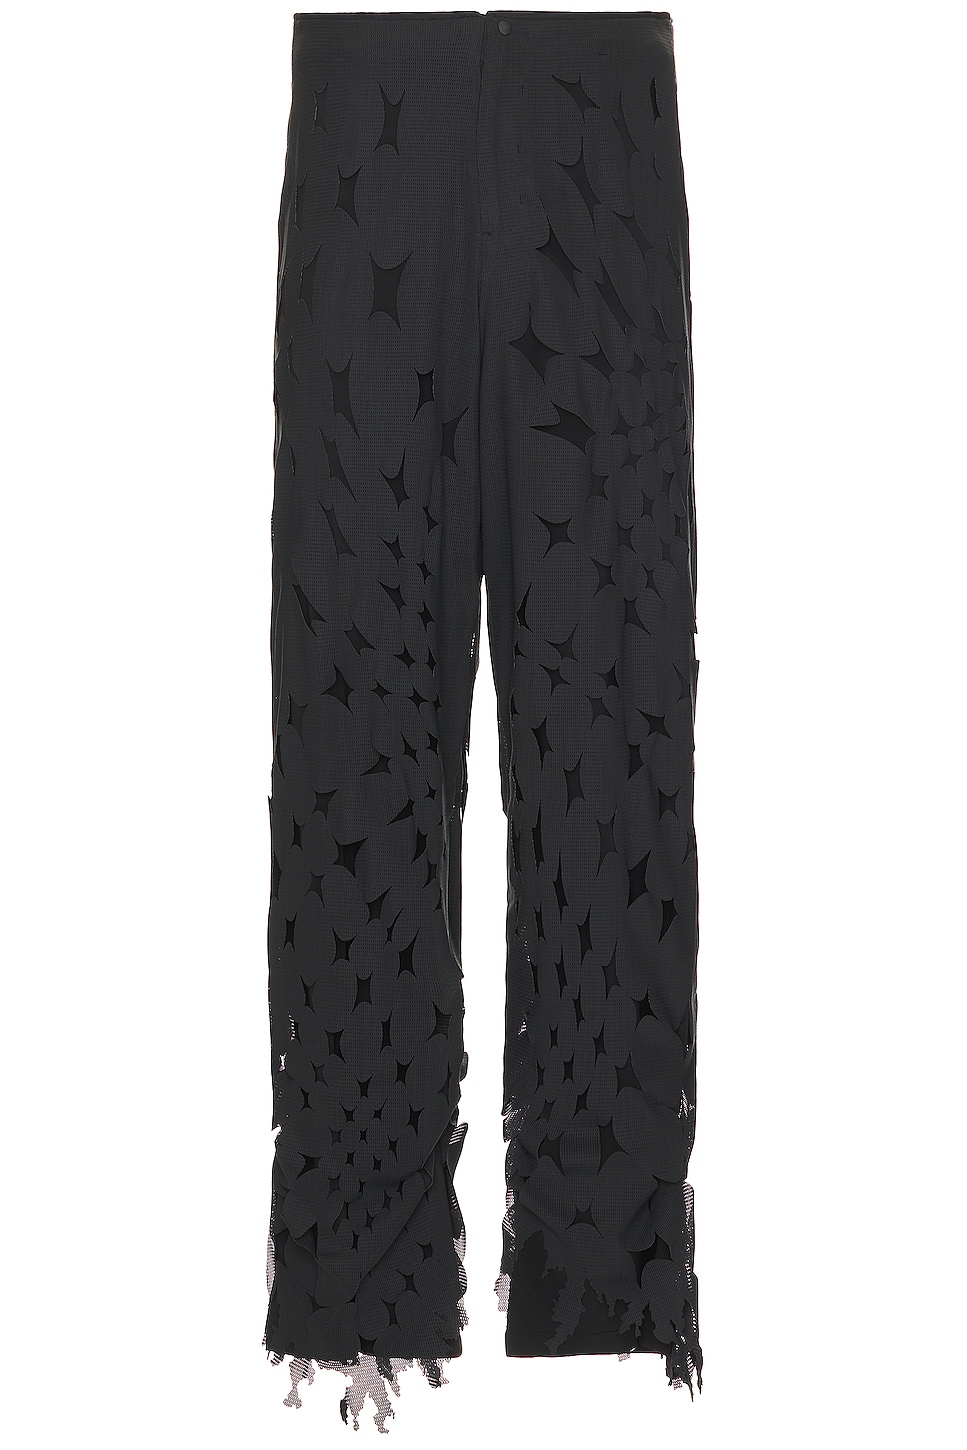 Image 1 of POST ARCHIVE FACTION (PAF) 5.1 Technical Pants Left in BLACK